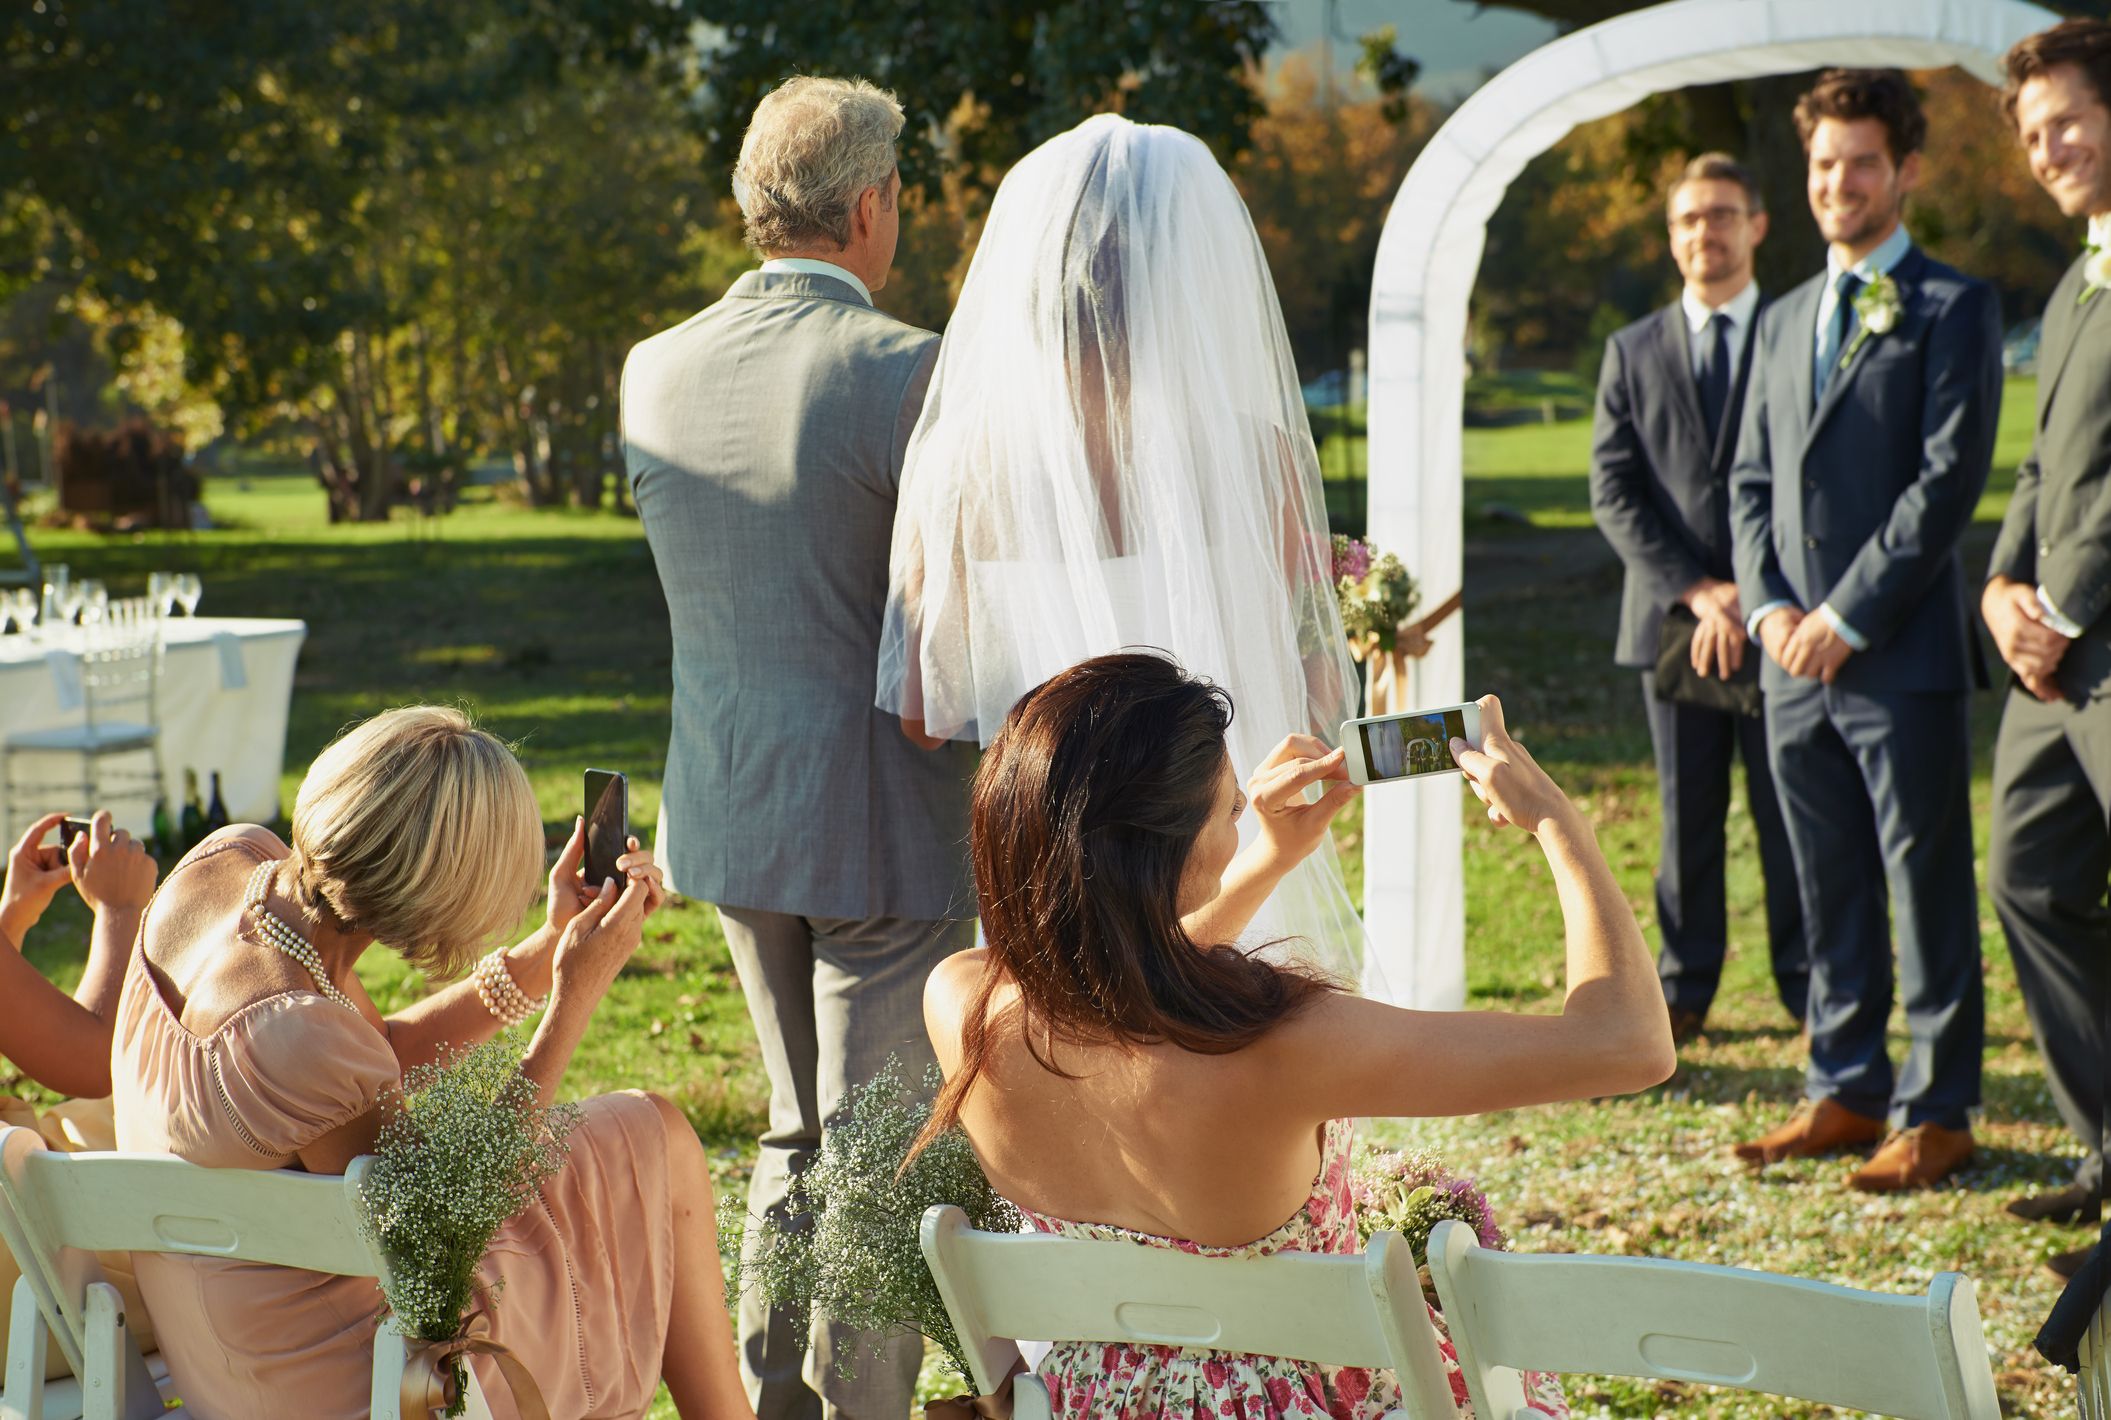 The Rules of Etiquette for the Wedding Party